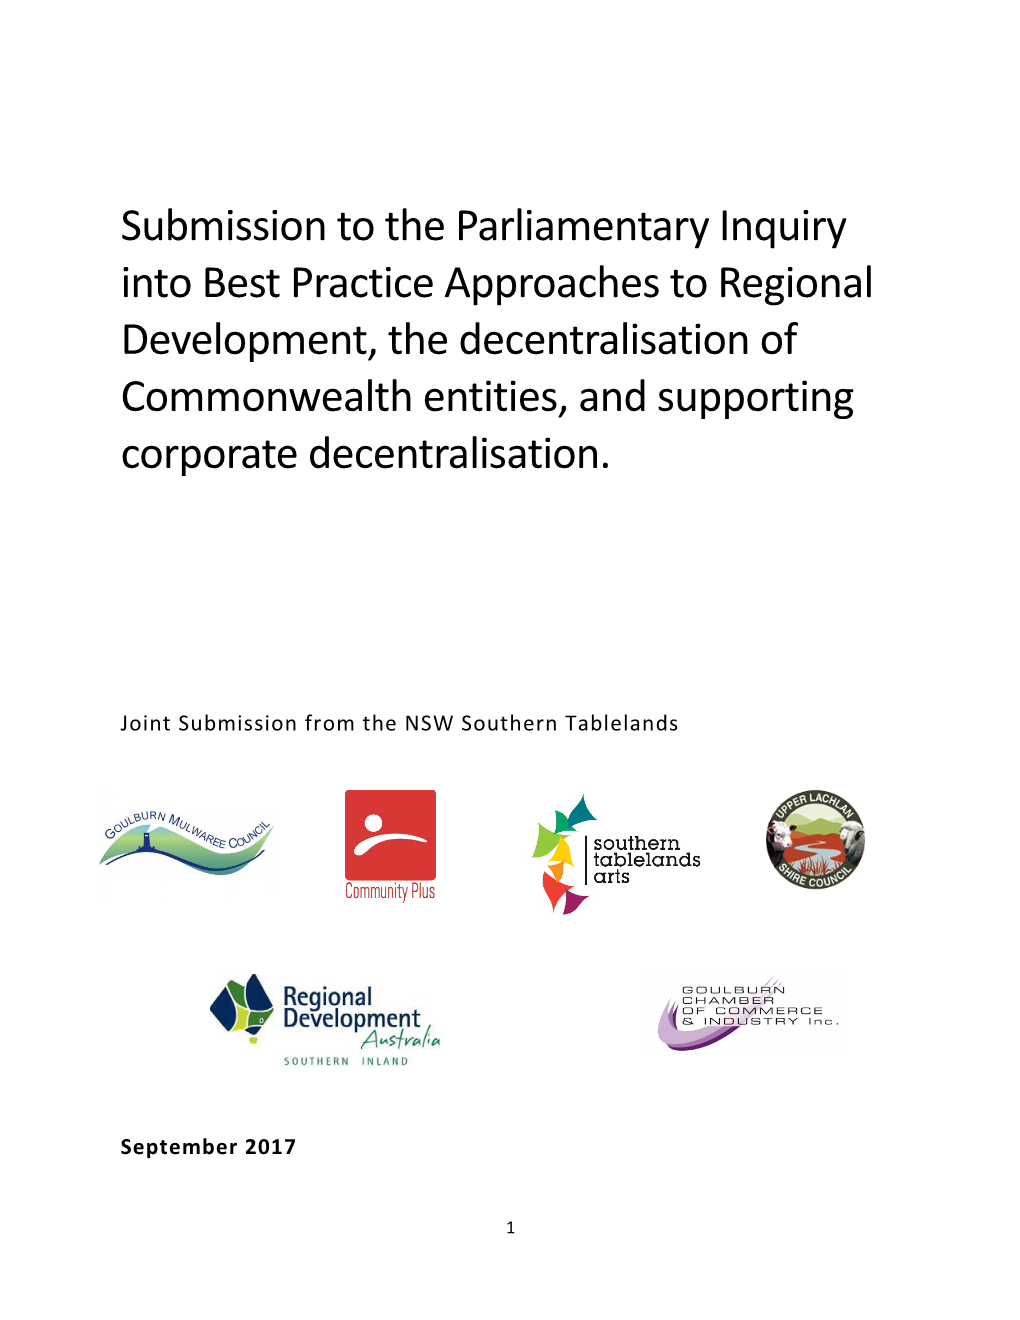 Submission to the Parliamentary Inquiry Into Best Practice Approaches to Regional Development, the Decentralisation of Commonwea